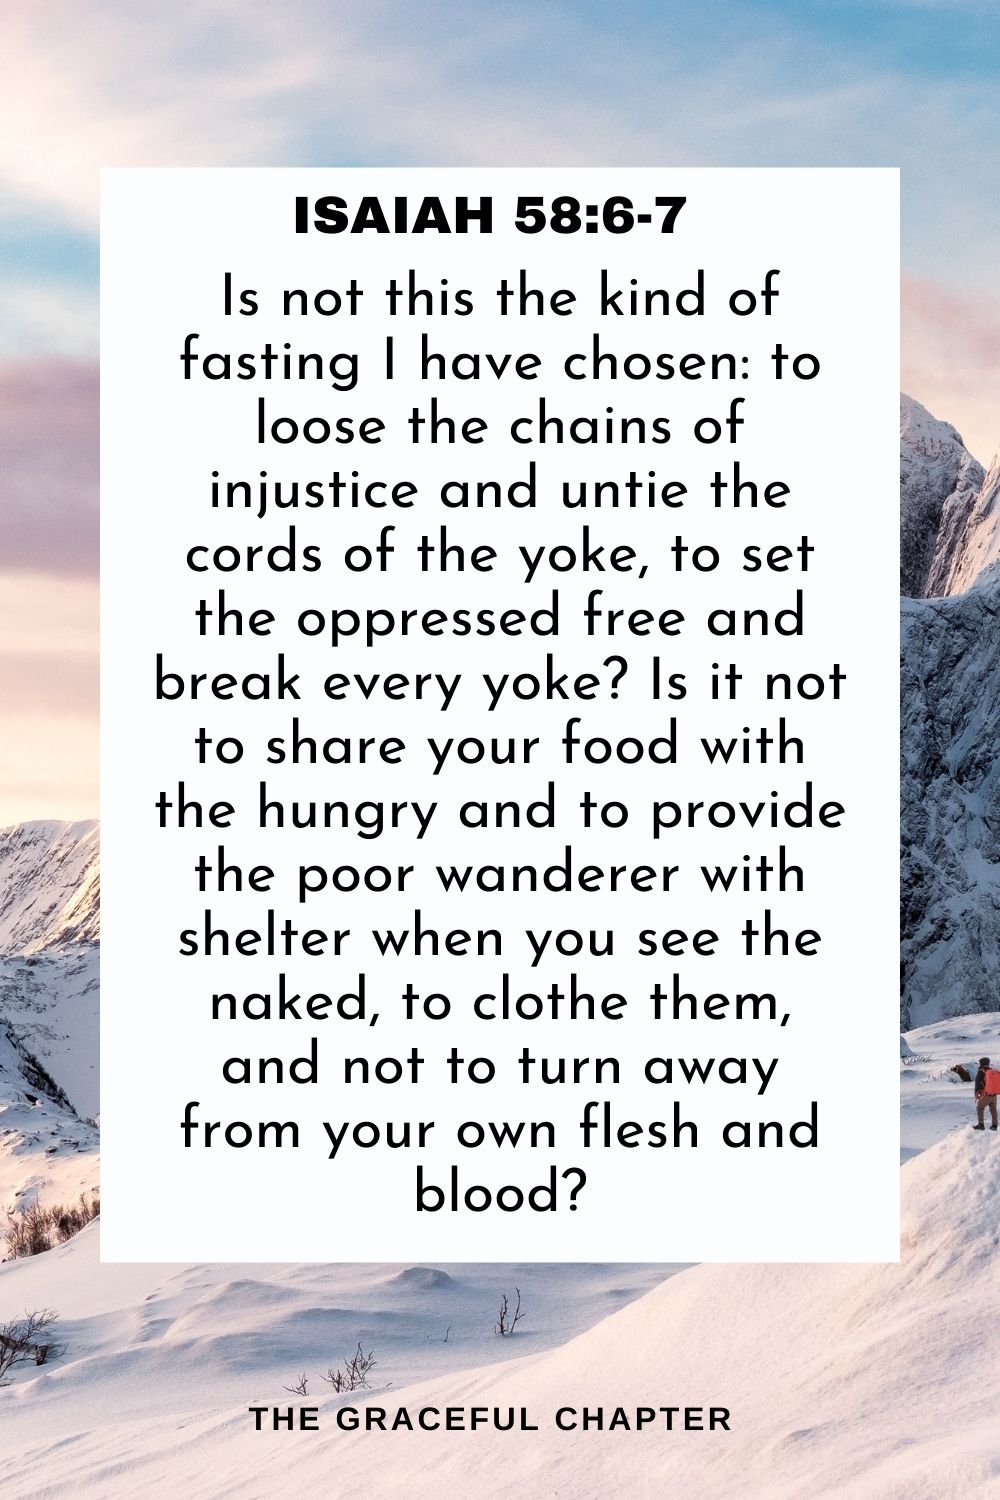 Is not this the kind of fasting I have chosen: to loose the chains of injustice and untie the cords of the yoke, to set the oppressed free and break every yoke? Is it not to share your food with the hungry and to provide the poor wanderer with shelter when you see the naked, to clothe them, and not to turn away from your own flesh and blood? Isaiah 58:6-7